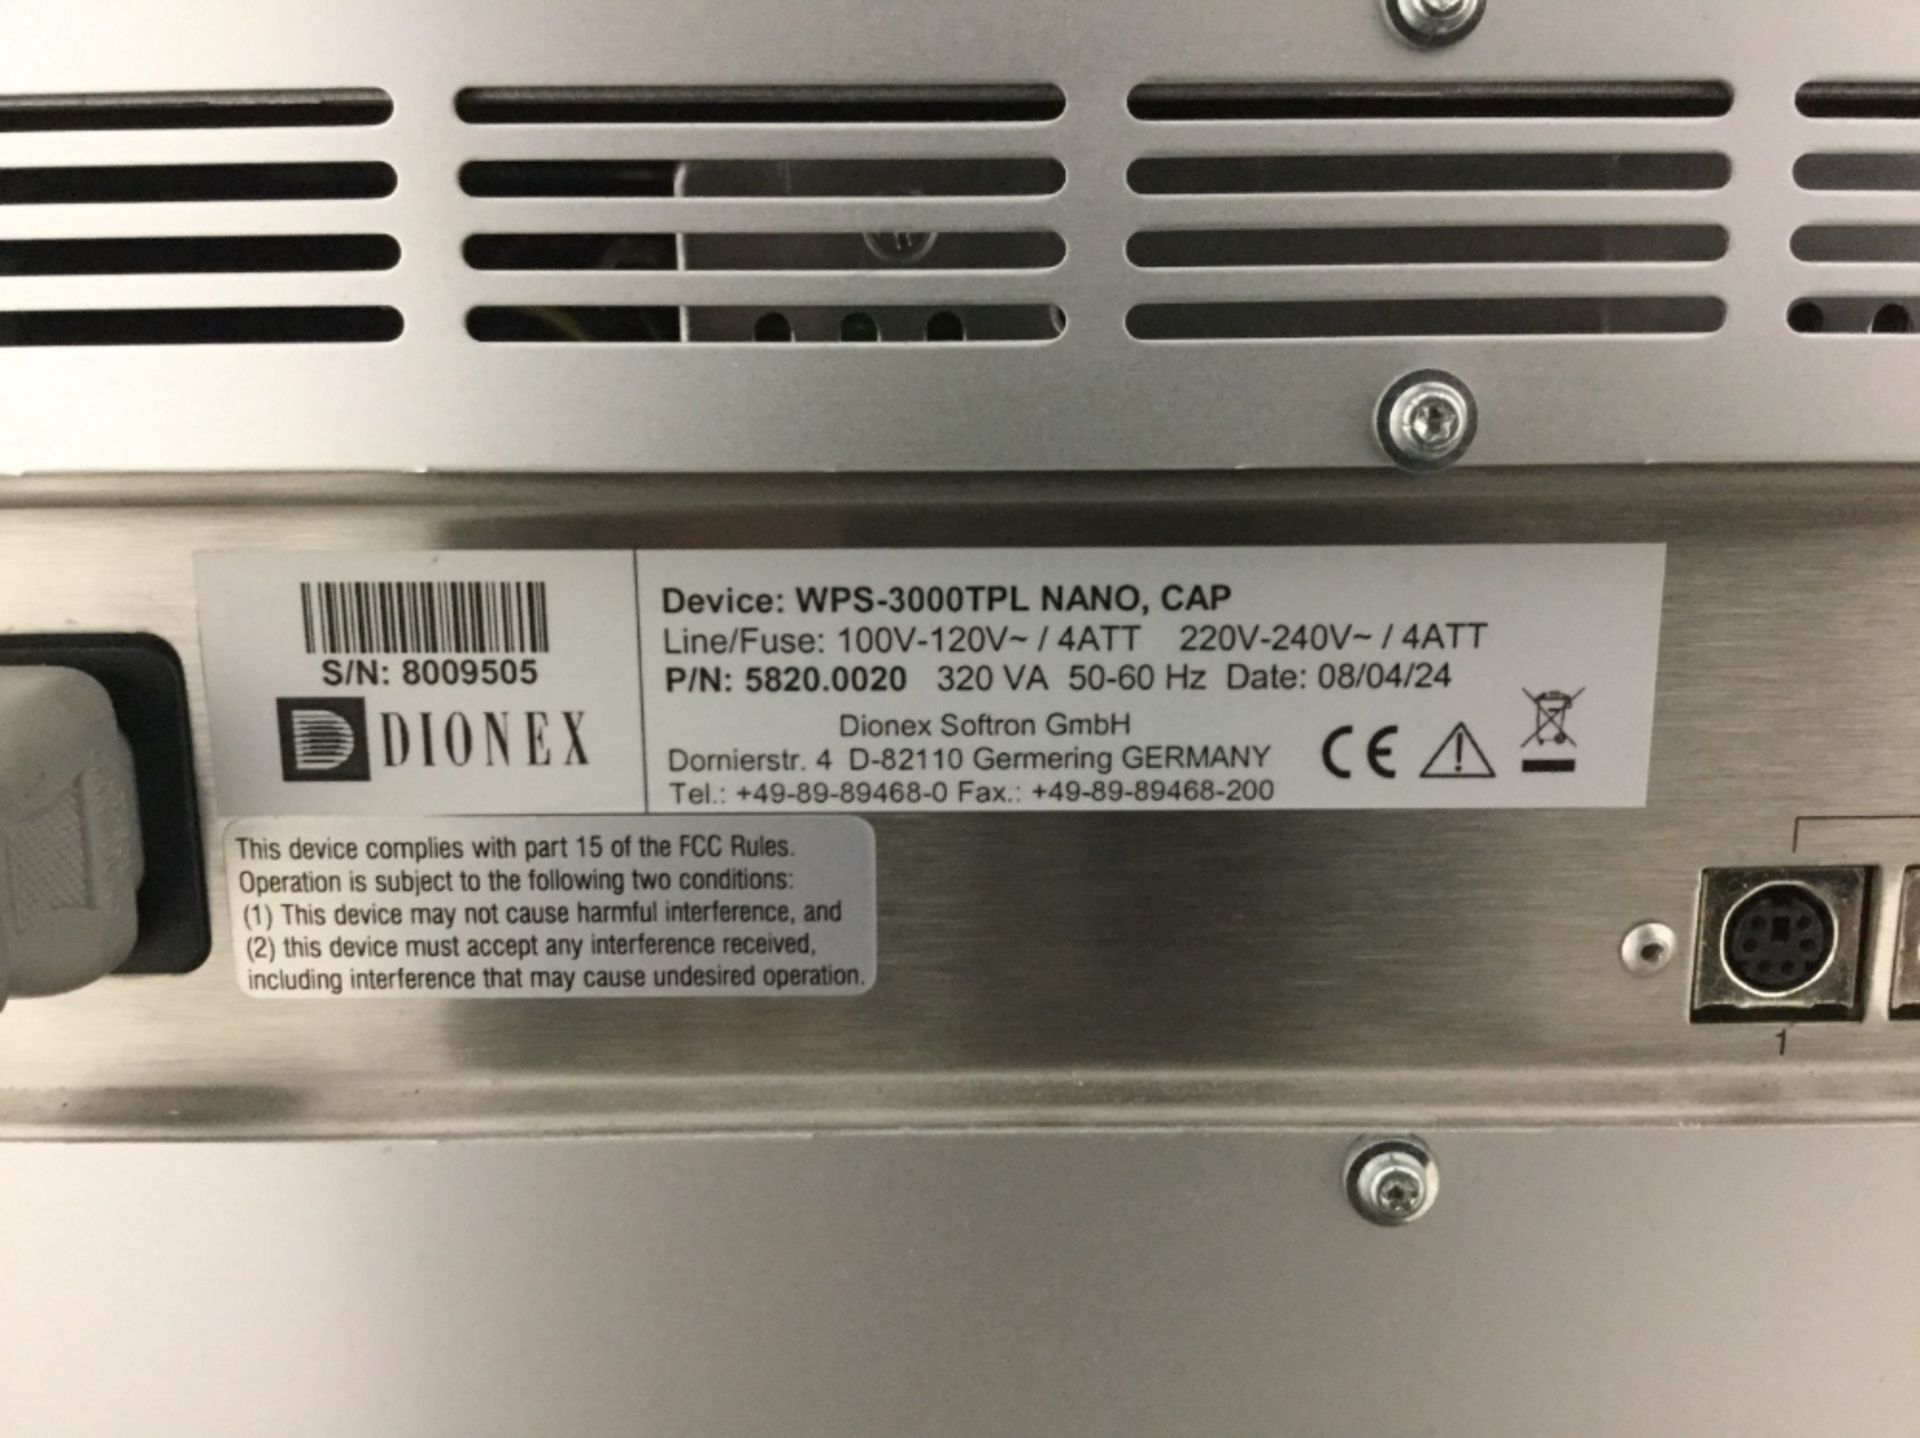 Dionex UltiMate 3000 UHPLC System - Image 7 of 8